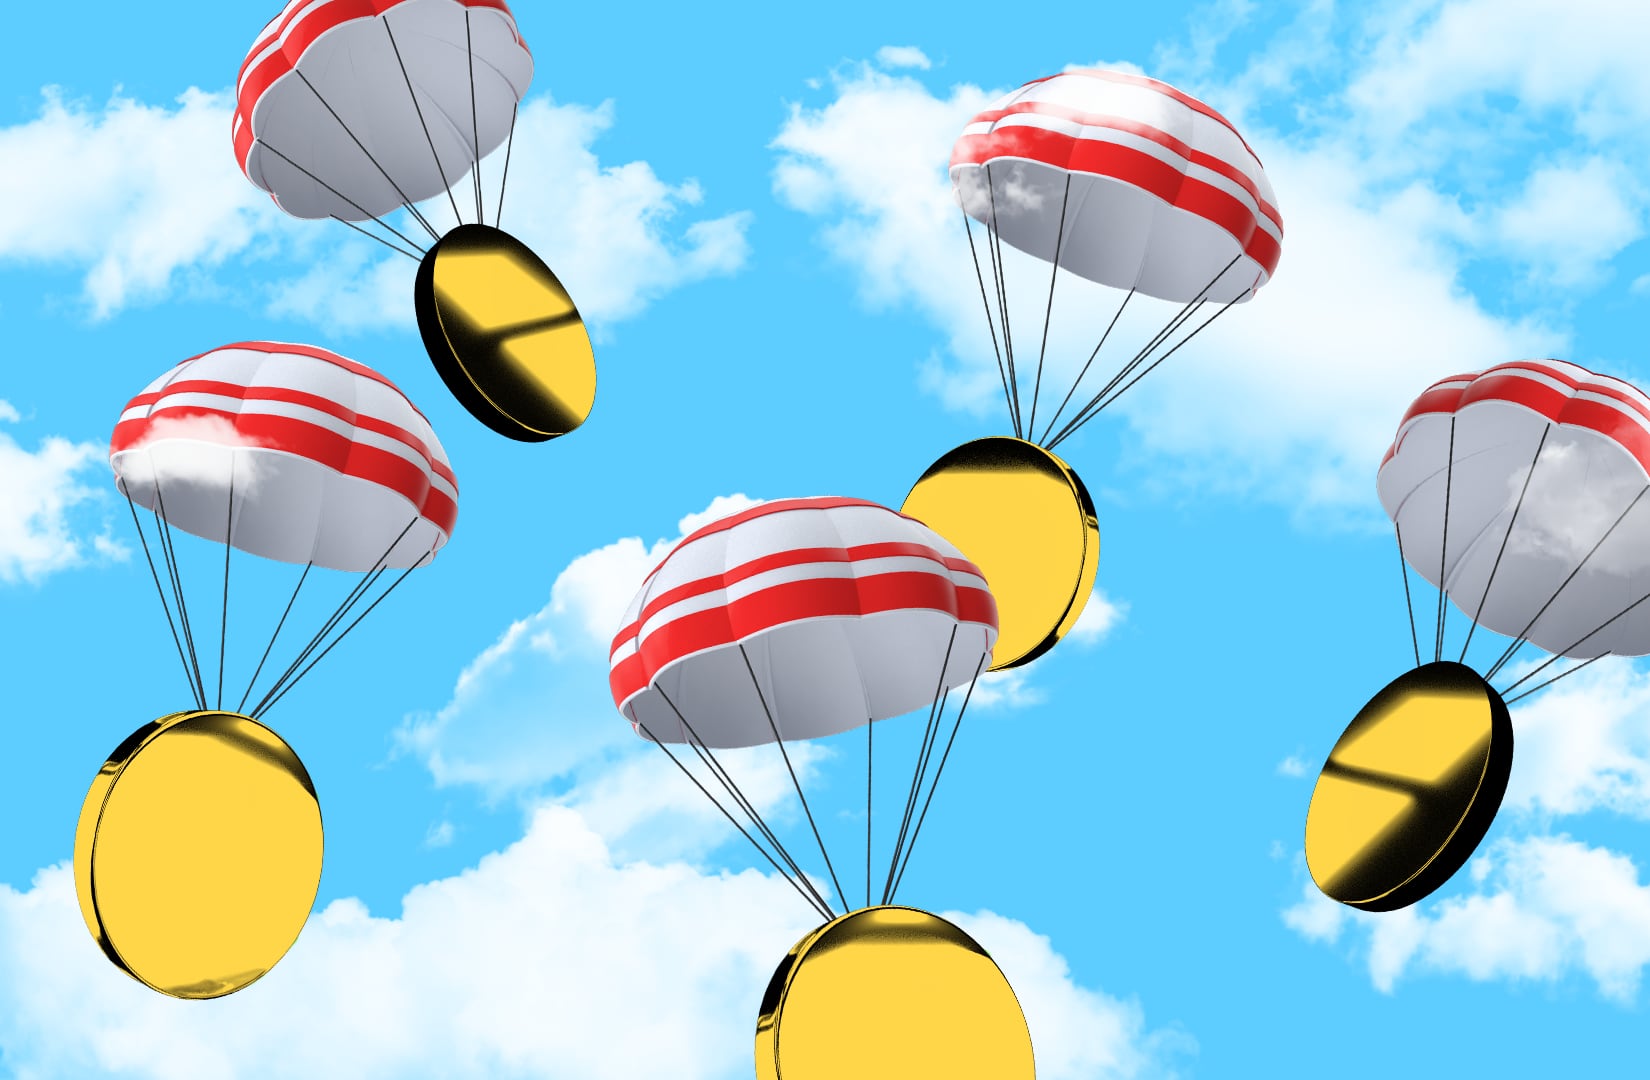 Airdrop frenzy drives Zircuit’s $2.5bn in deposits. Here are five other projects to watch